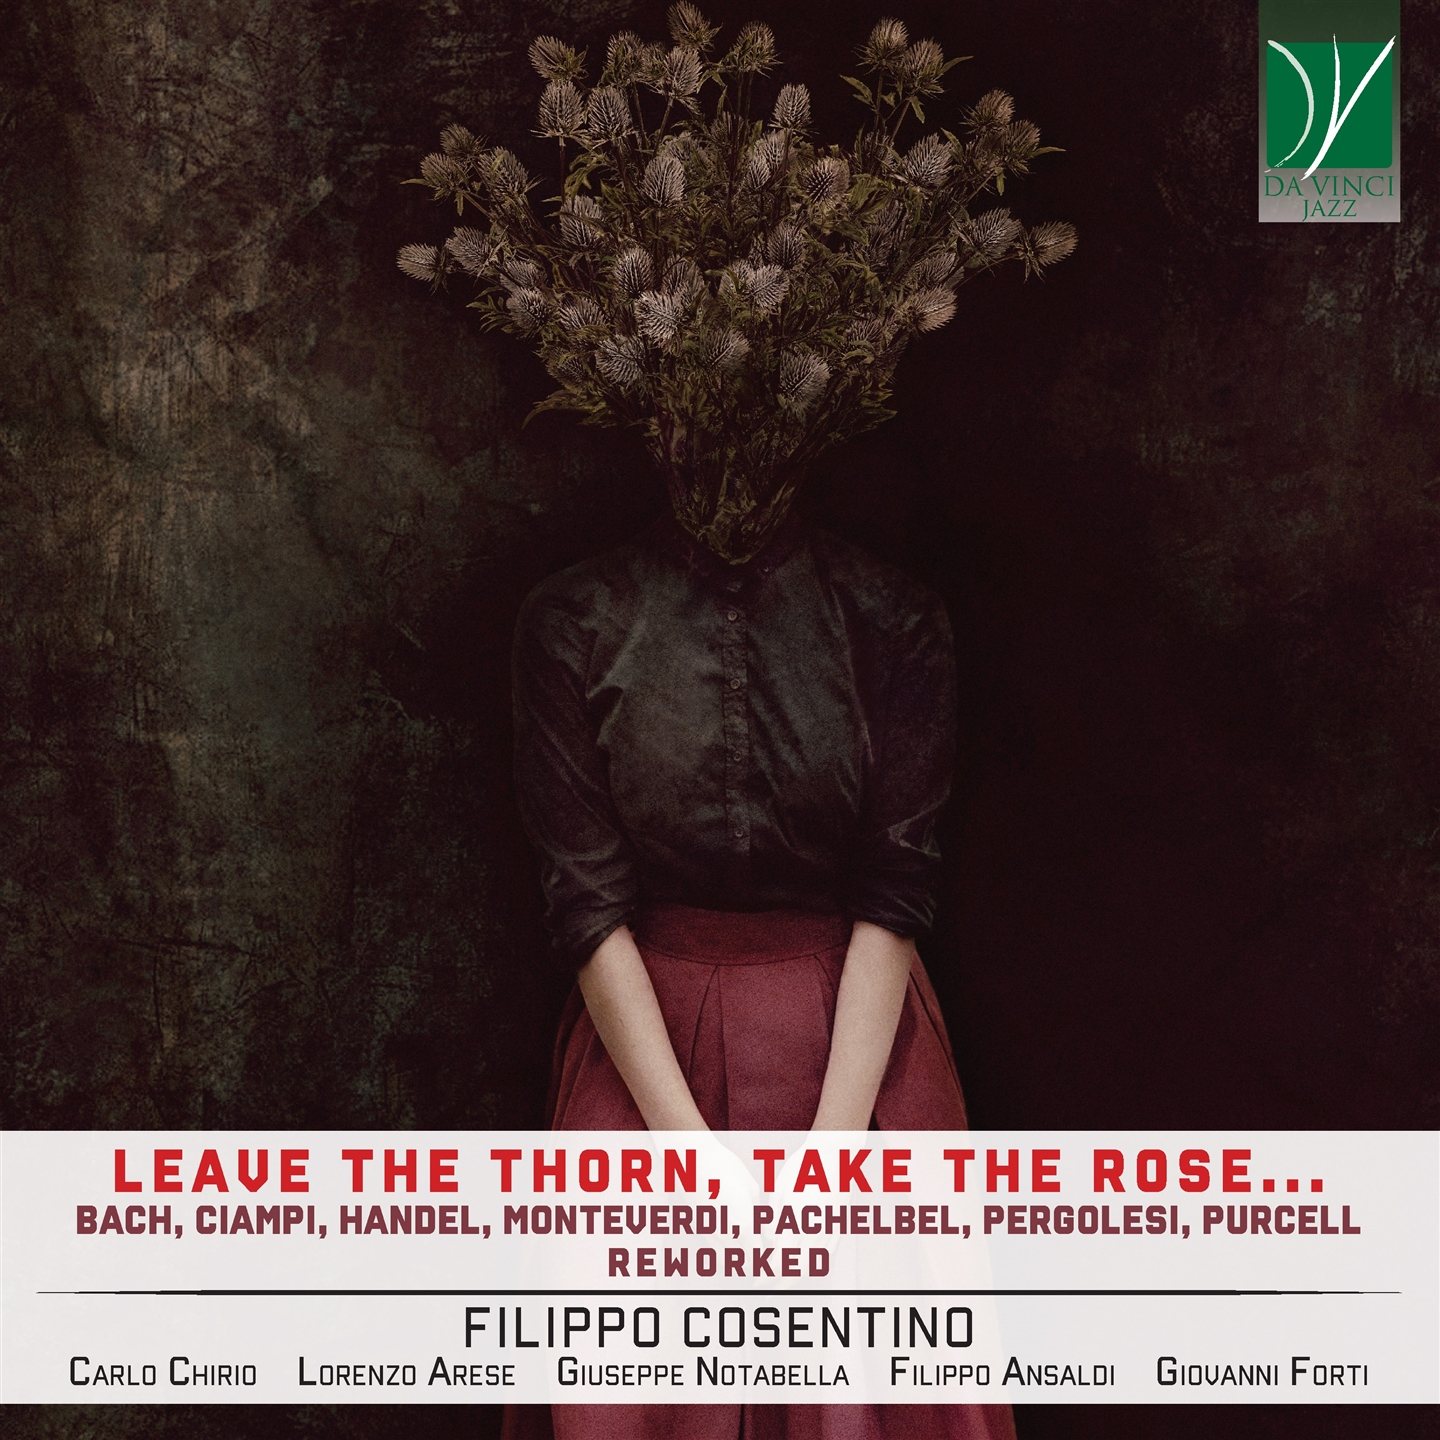 LEAVE THE THORN, TAKE THE ROSE